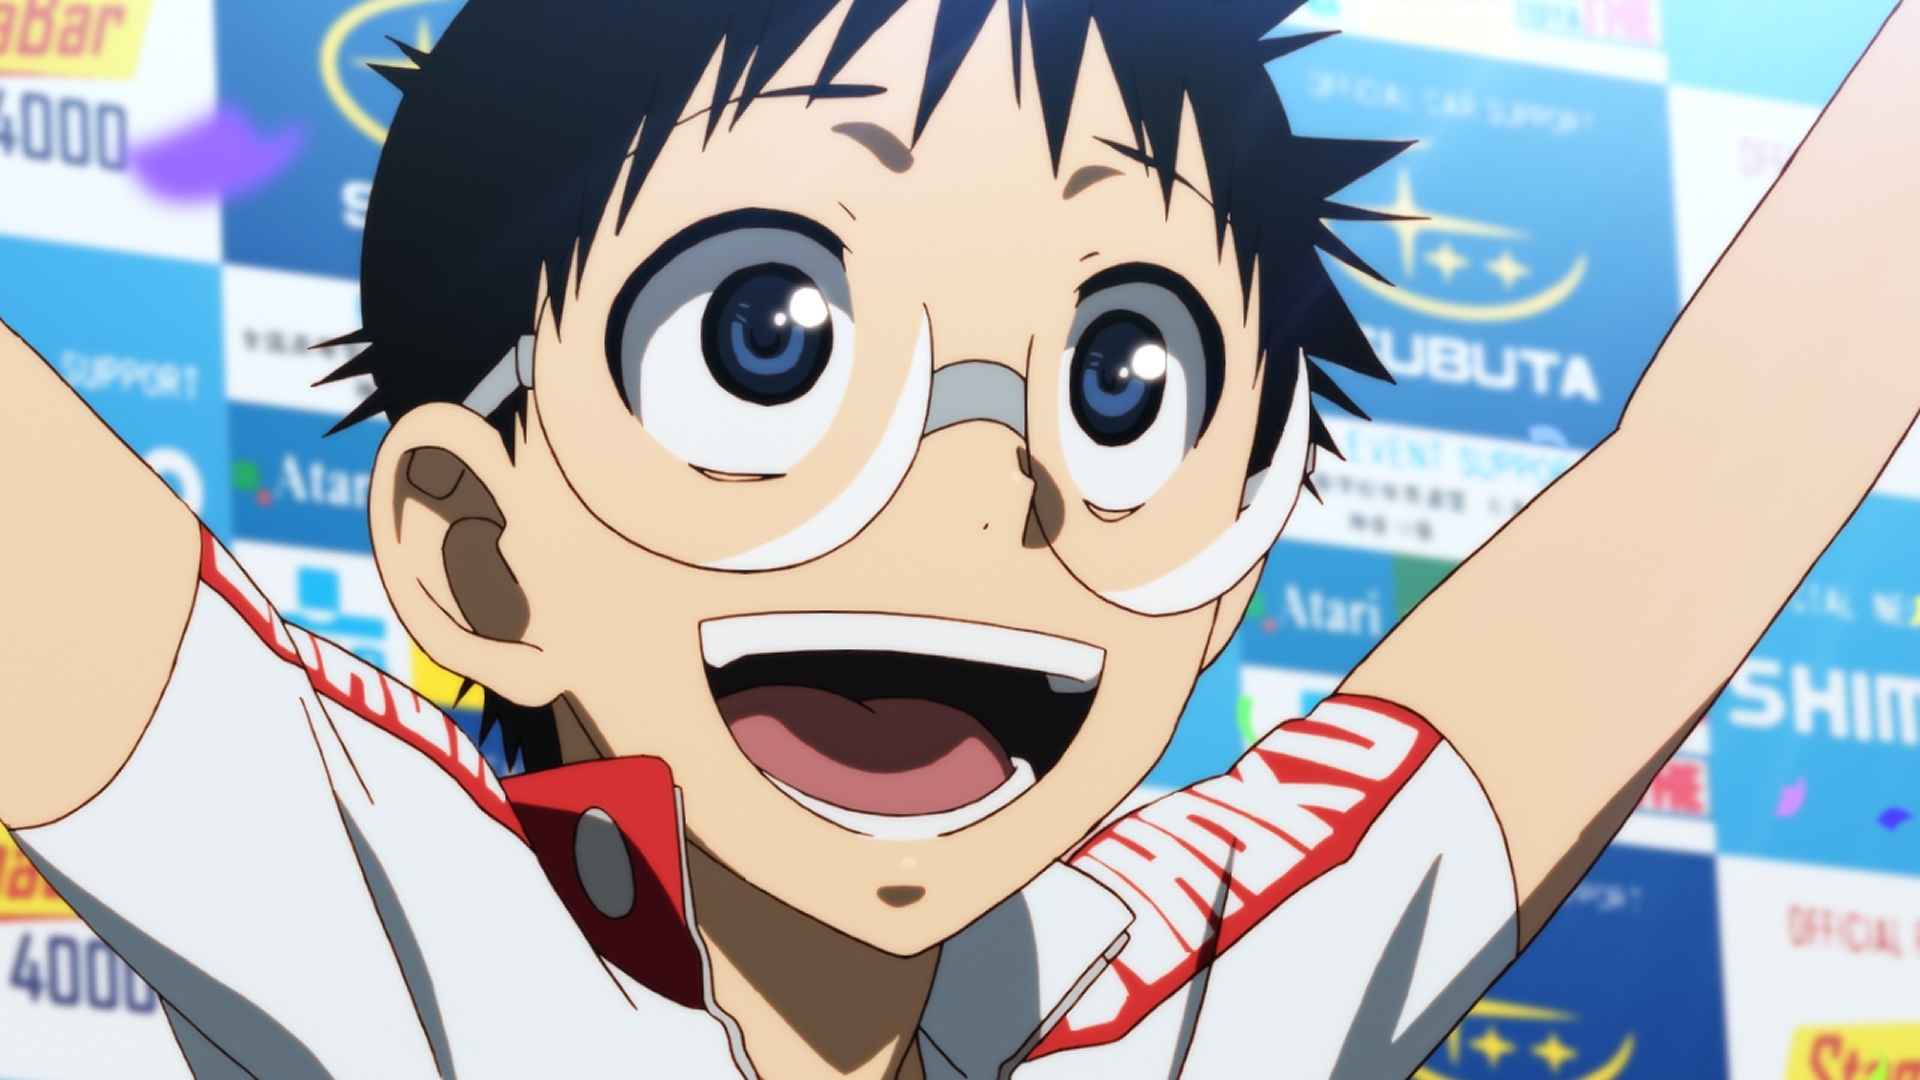 Main character Sakamichi Onodera celebrates on the victor's platform in a scene from the Yowamushi Pedal TV anime.